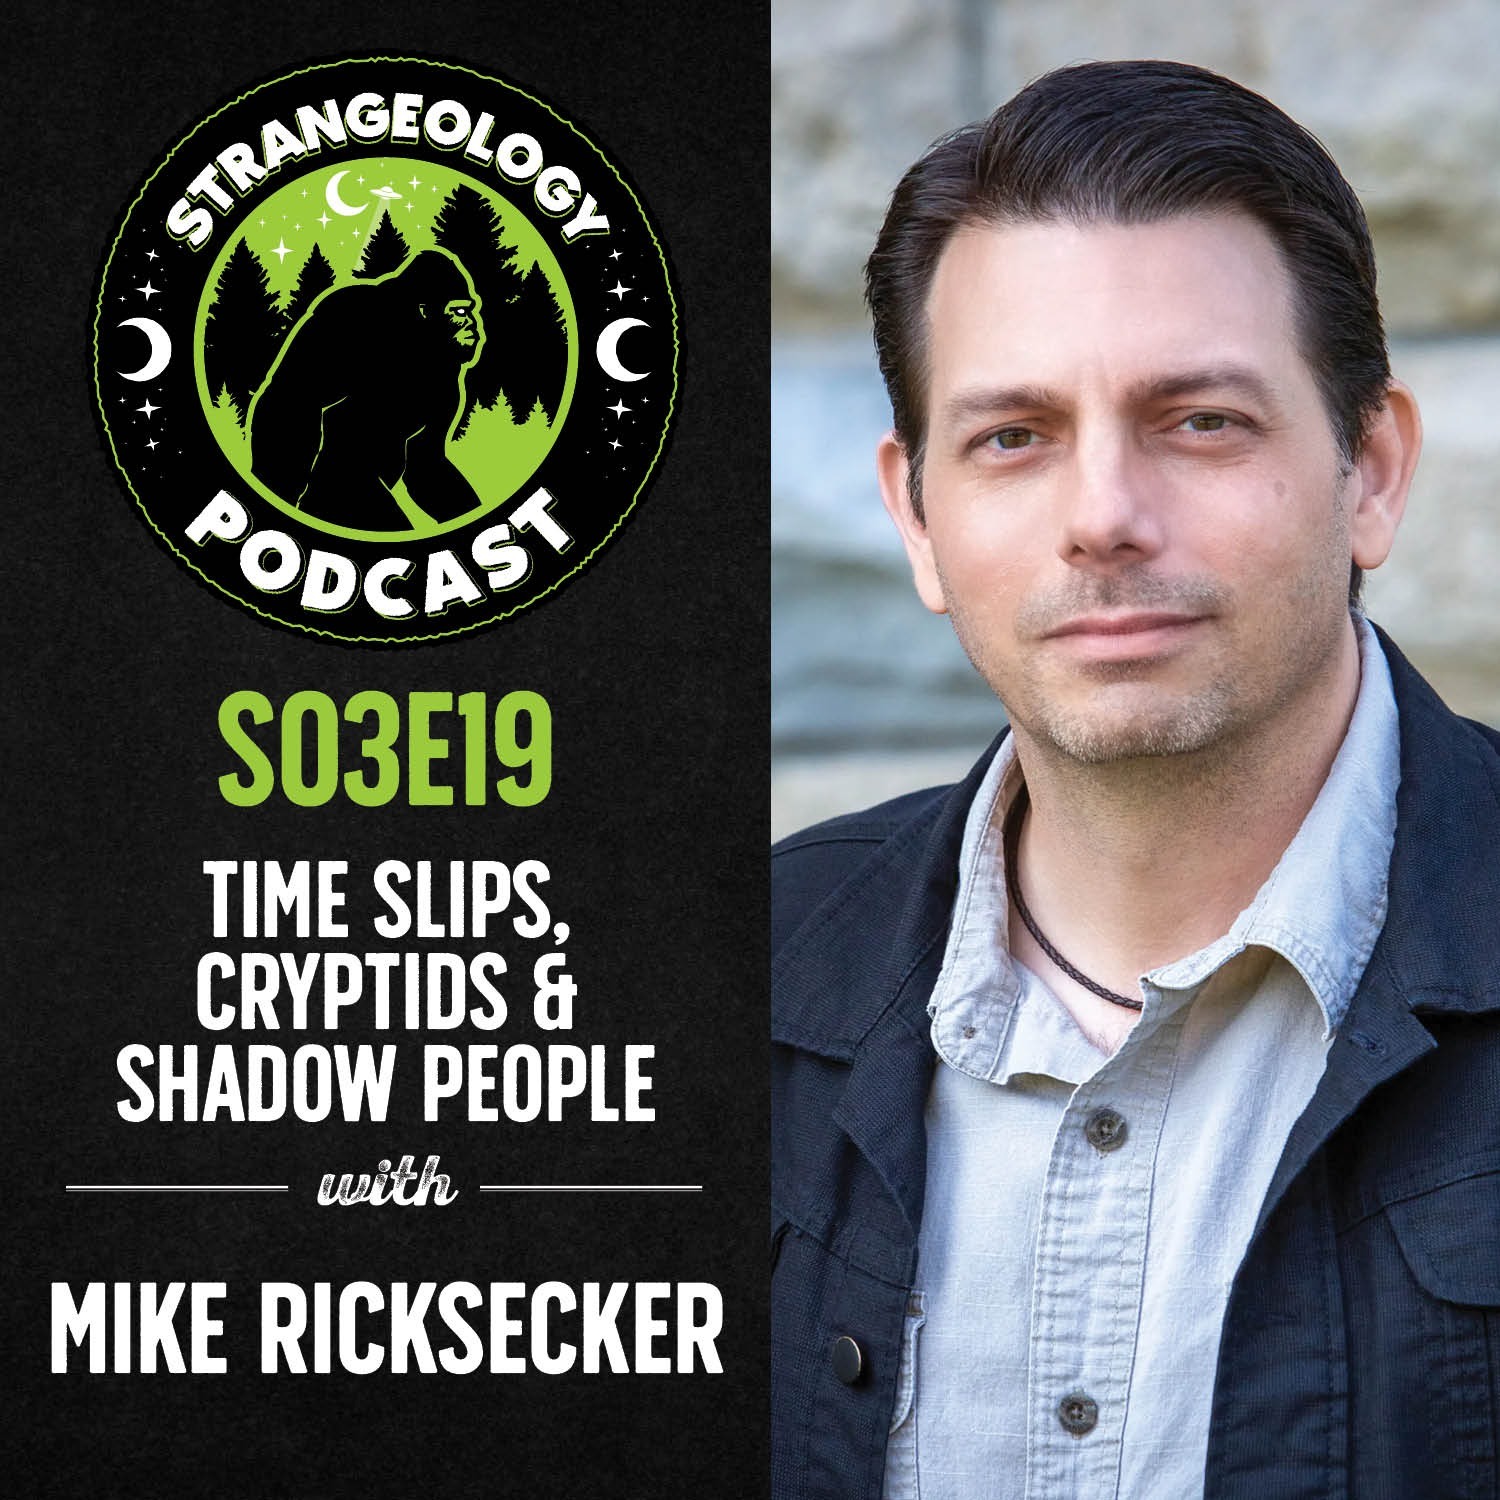 Time Slips, Cryptids & Shadow People w/ Mike Ricksecker